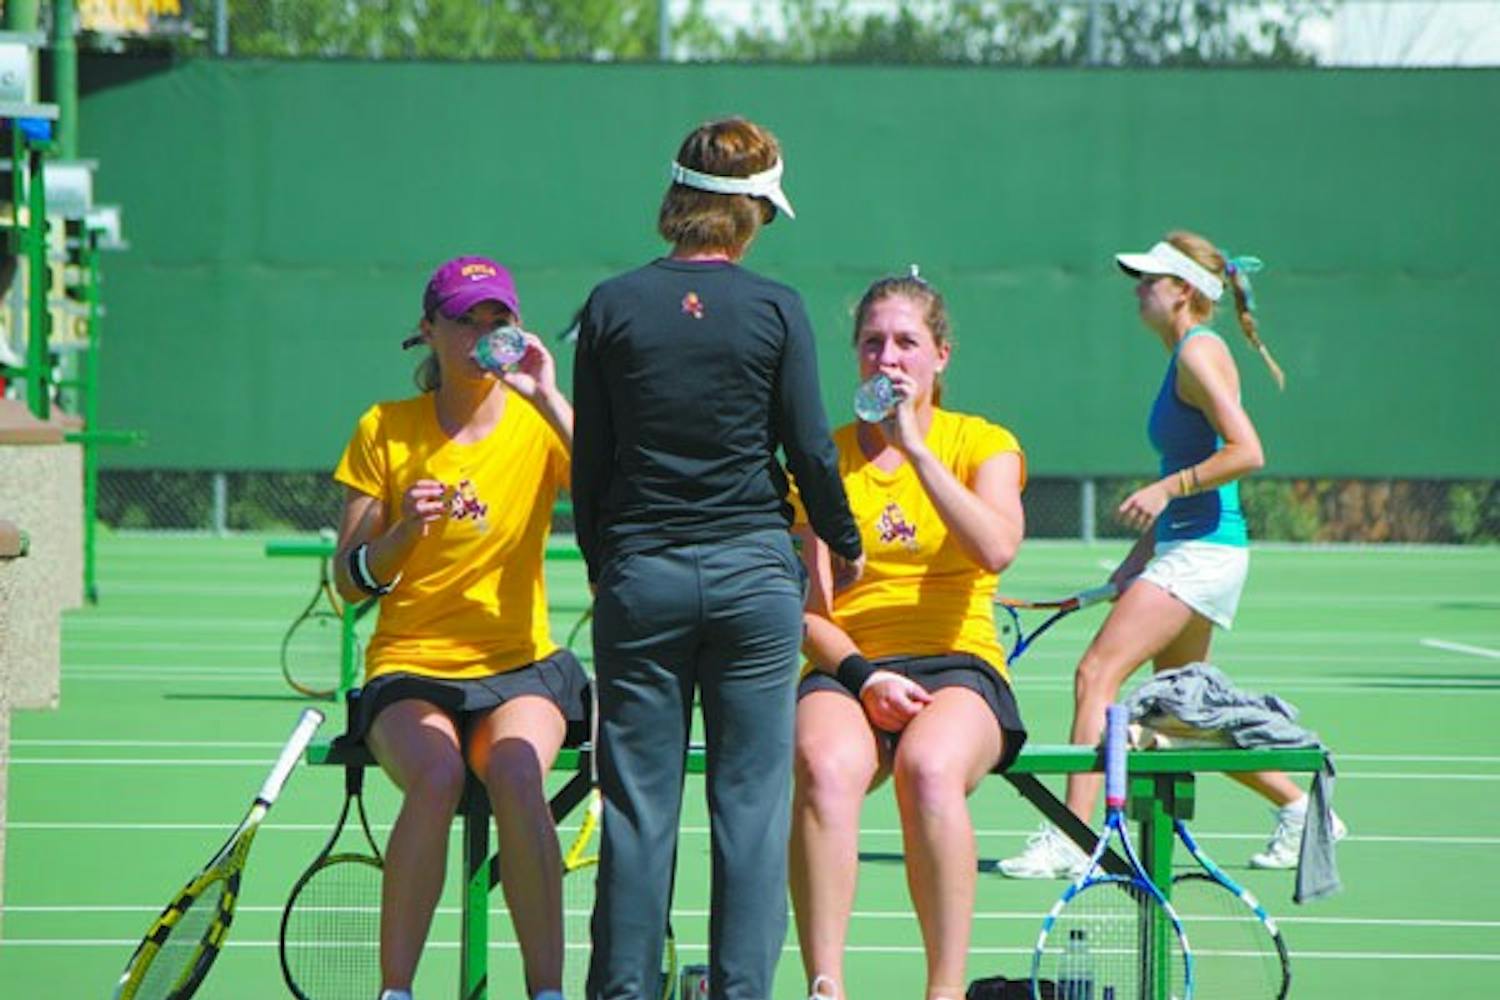 Sweeping up: ASU coach Sheila McInerney talks to seniors Micaela Hein (left) and Kelcy McKenna (right) during a break in their doubles match against UC Irvine on Tuesday. The Sun Devils beat both UC Irvine and DePaul on Wednesday by the same score, 7-0. (Photo by Nathan Meachem)